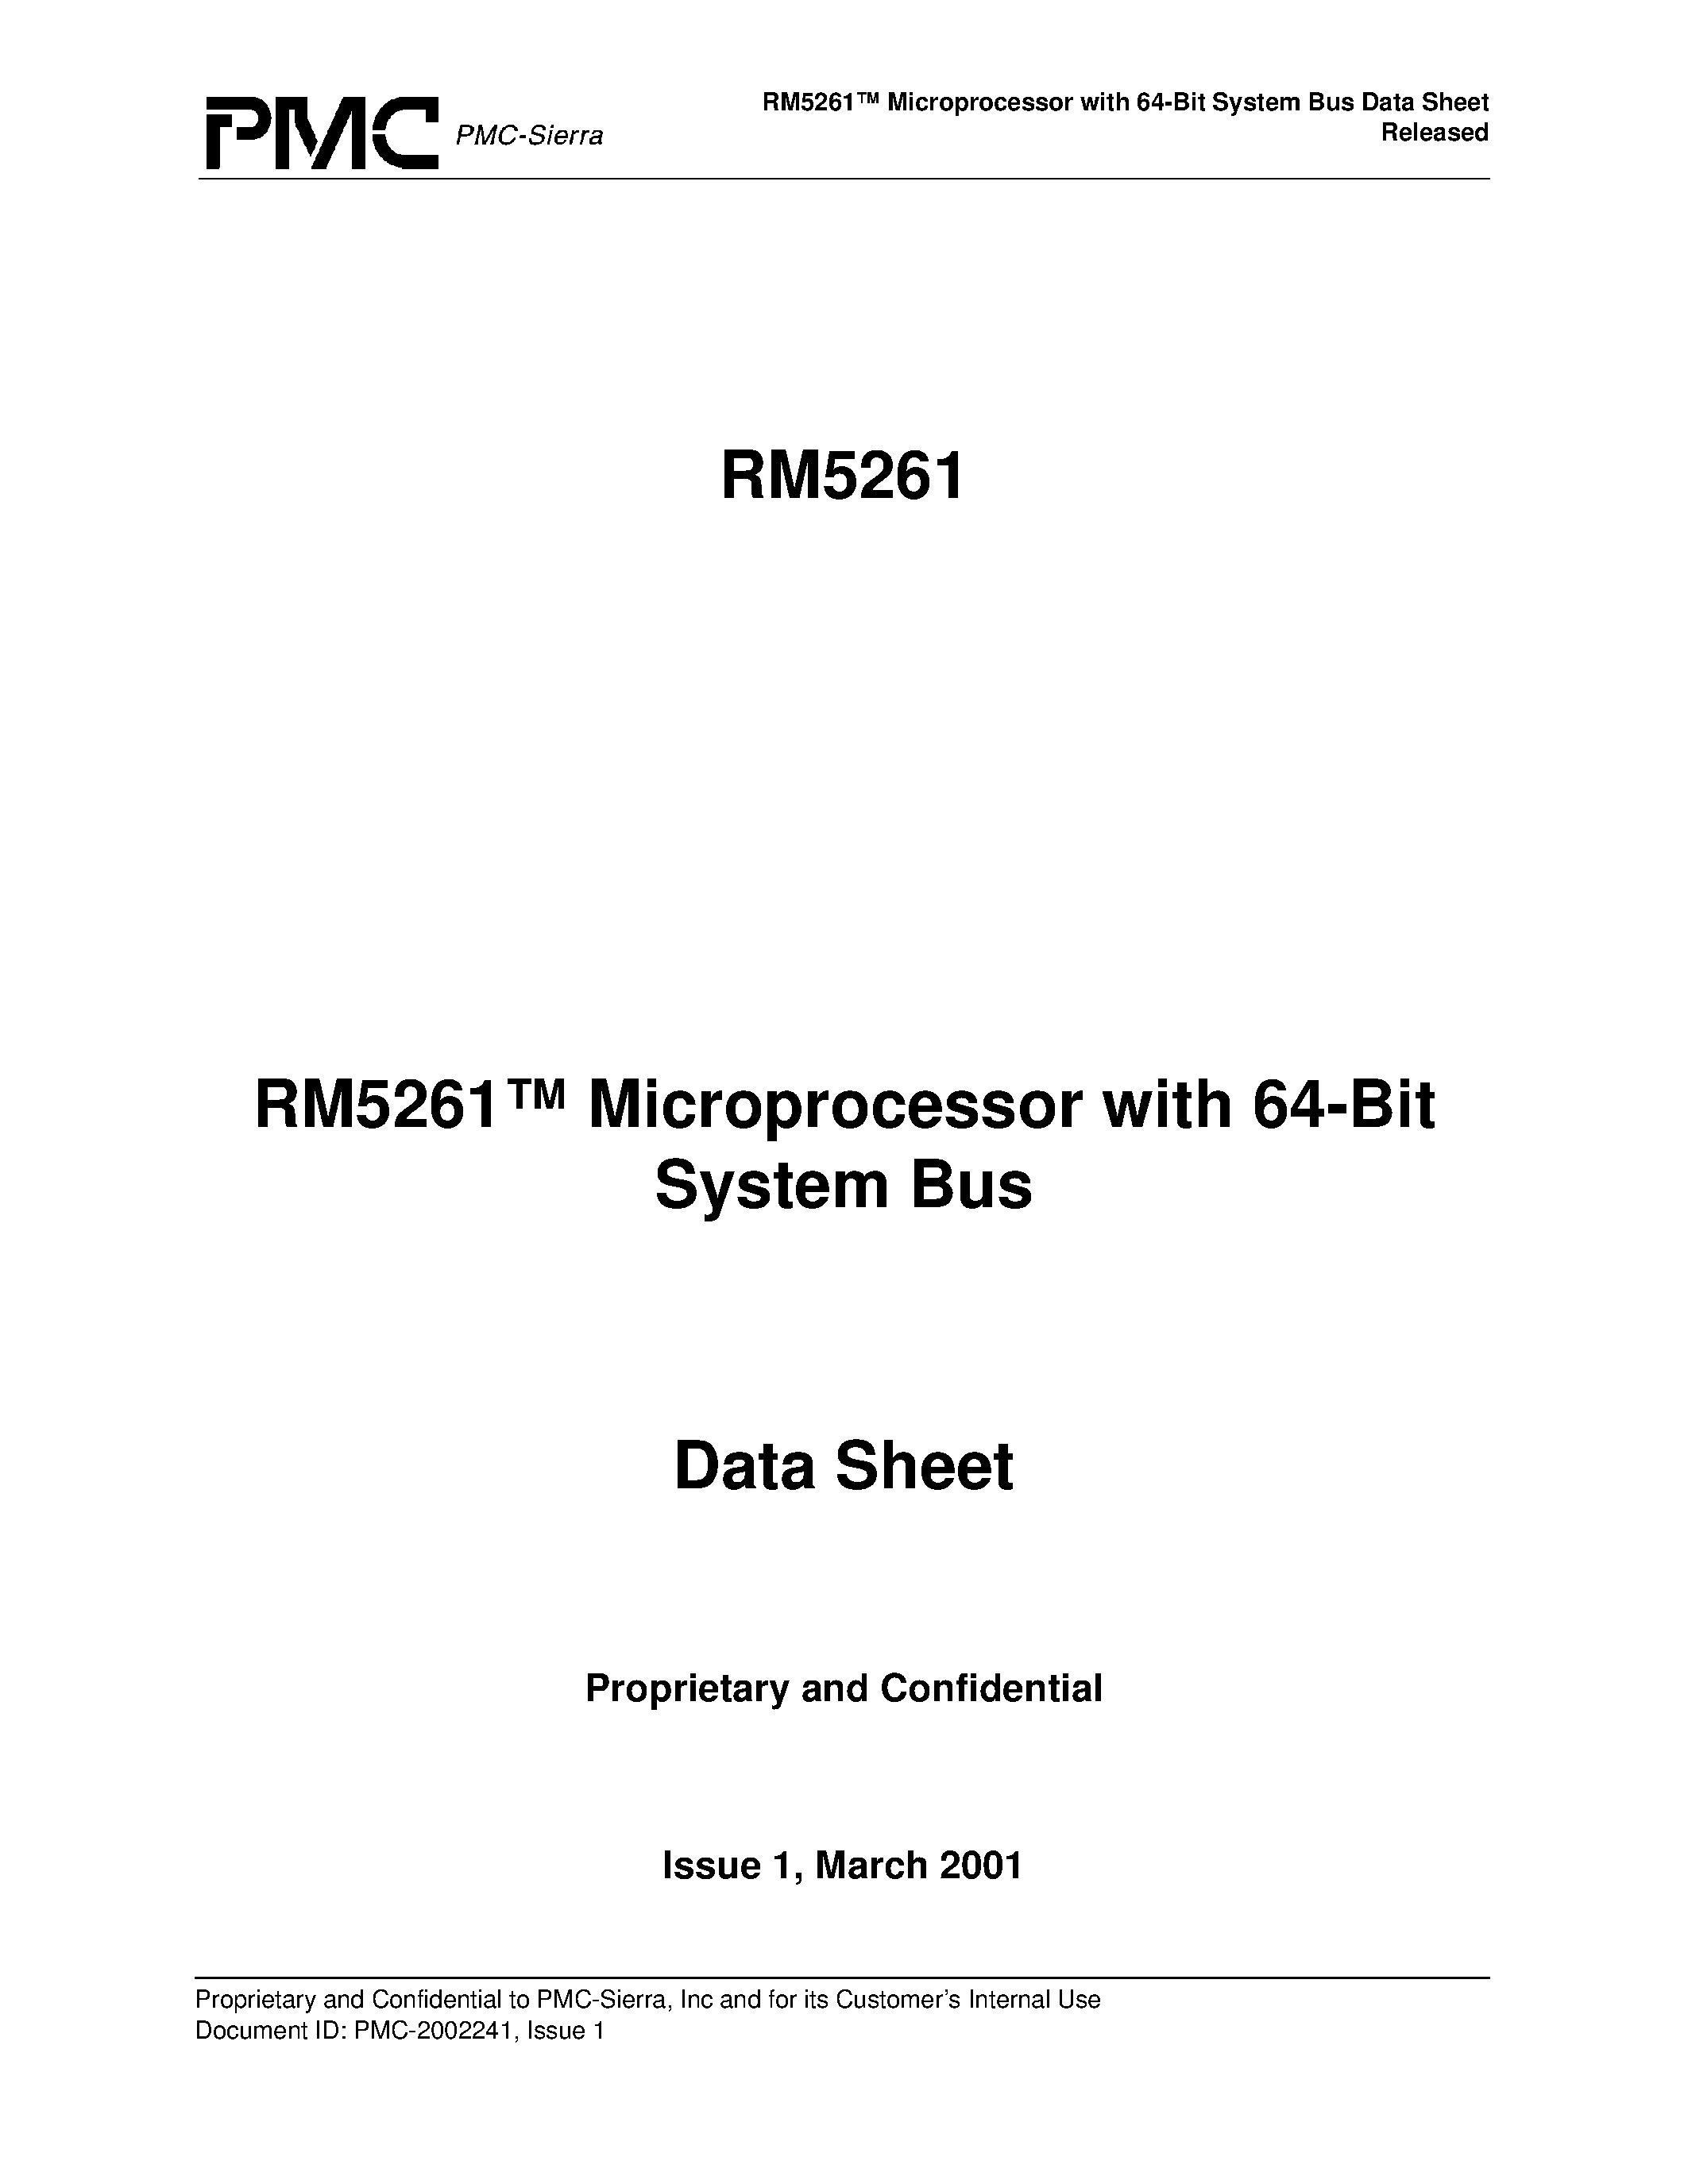 Даташит RM5261-200-Q - RM5261 Microprocessor with 64-Bit System Bus Data Sheet Released страница 1